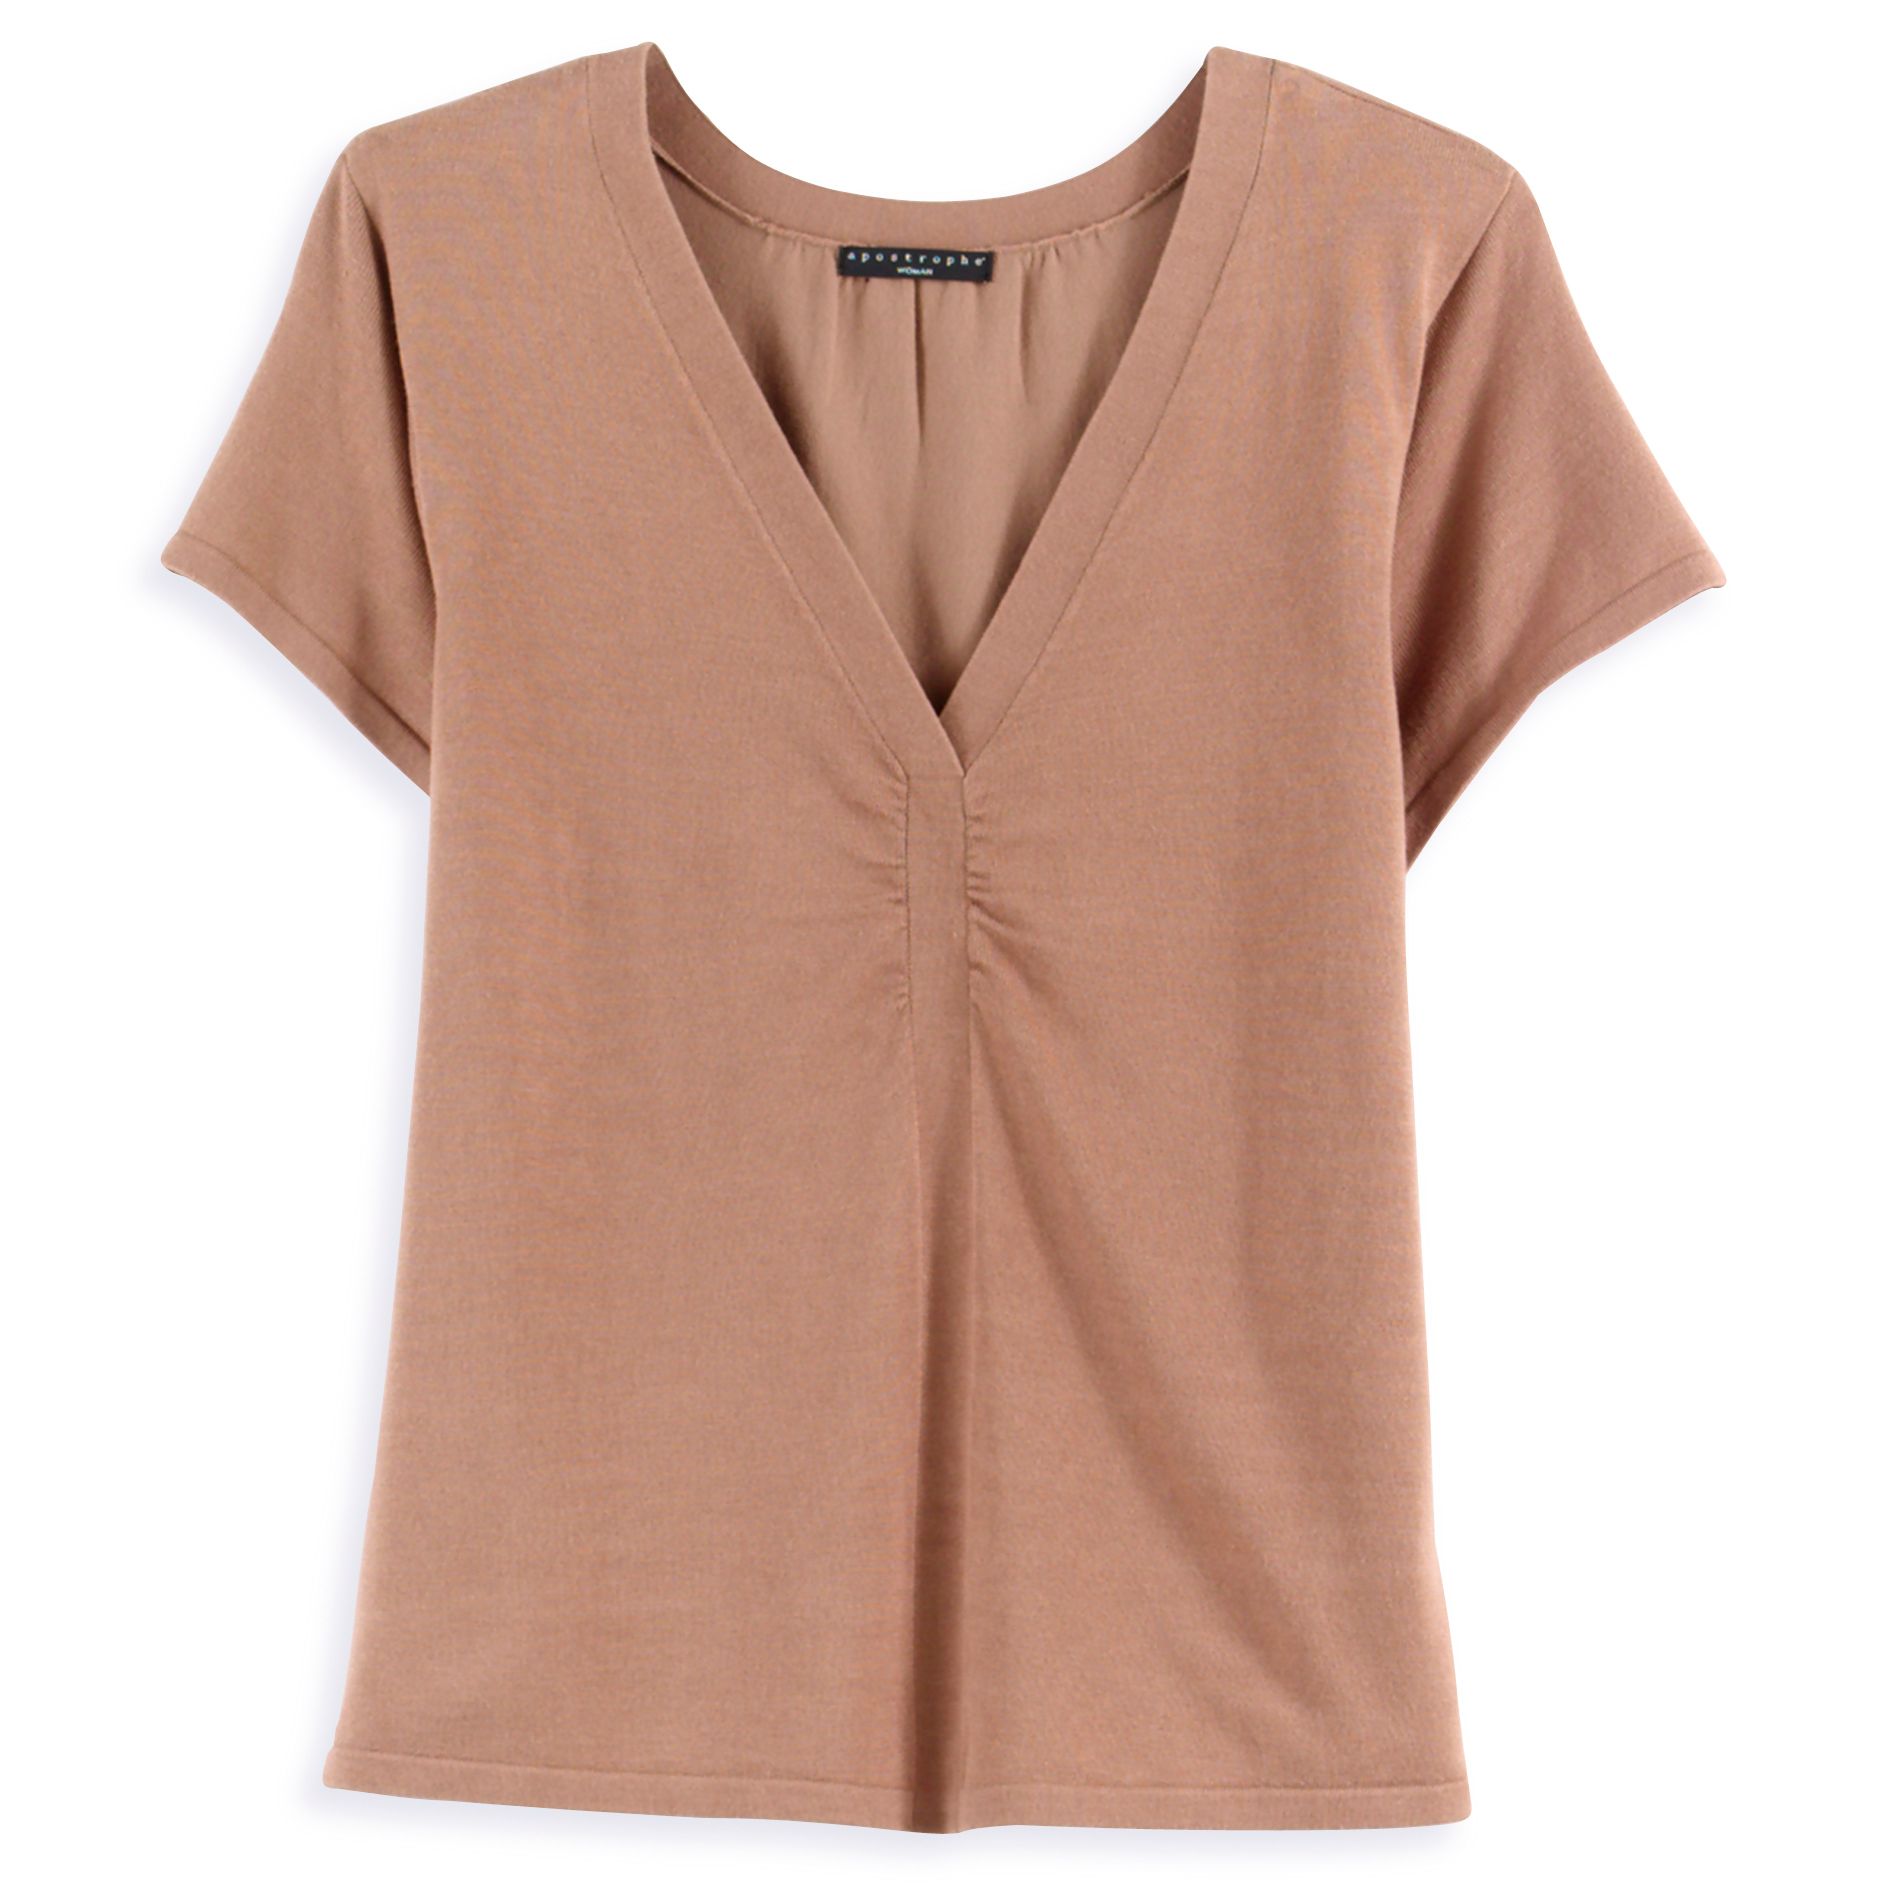 Metaphor Women's Plus Rouched Front Sweater